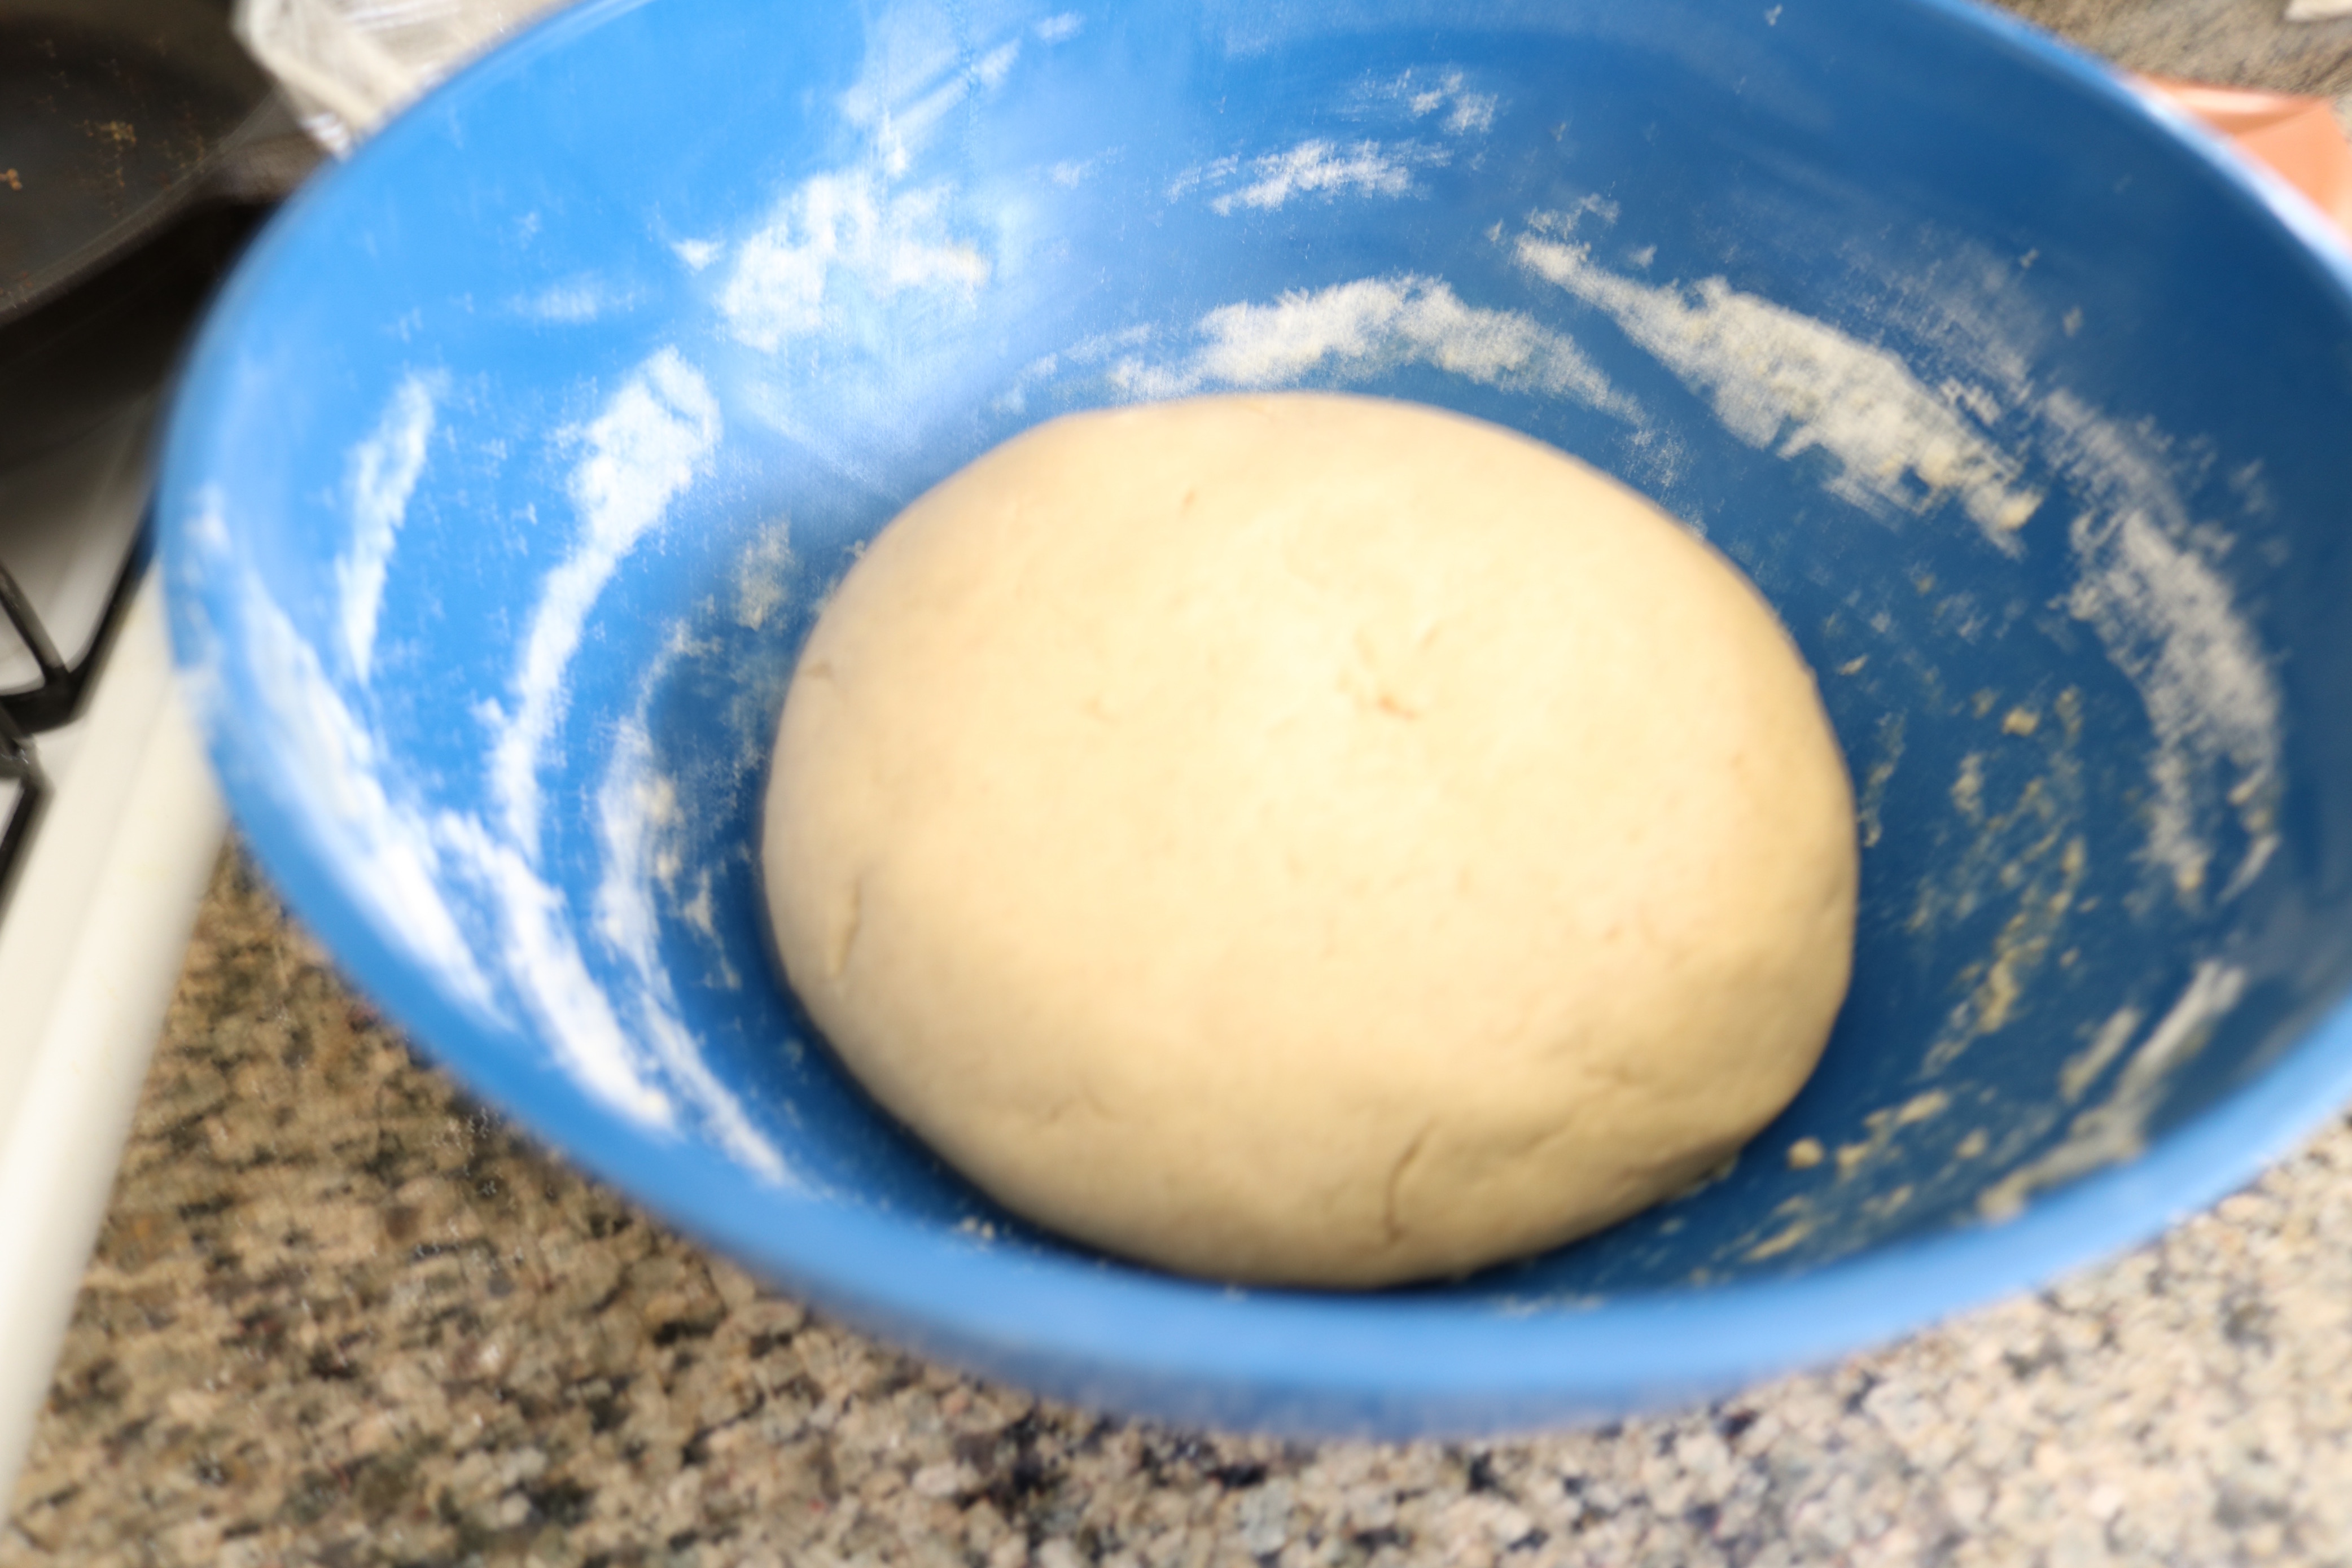 kneading bread and waiting for it to rise